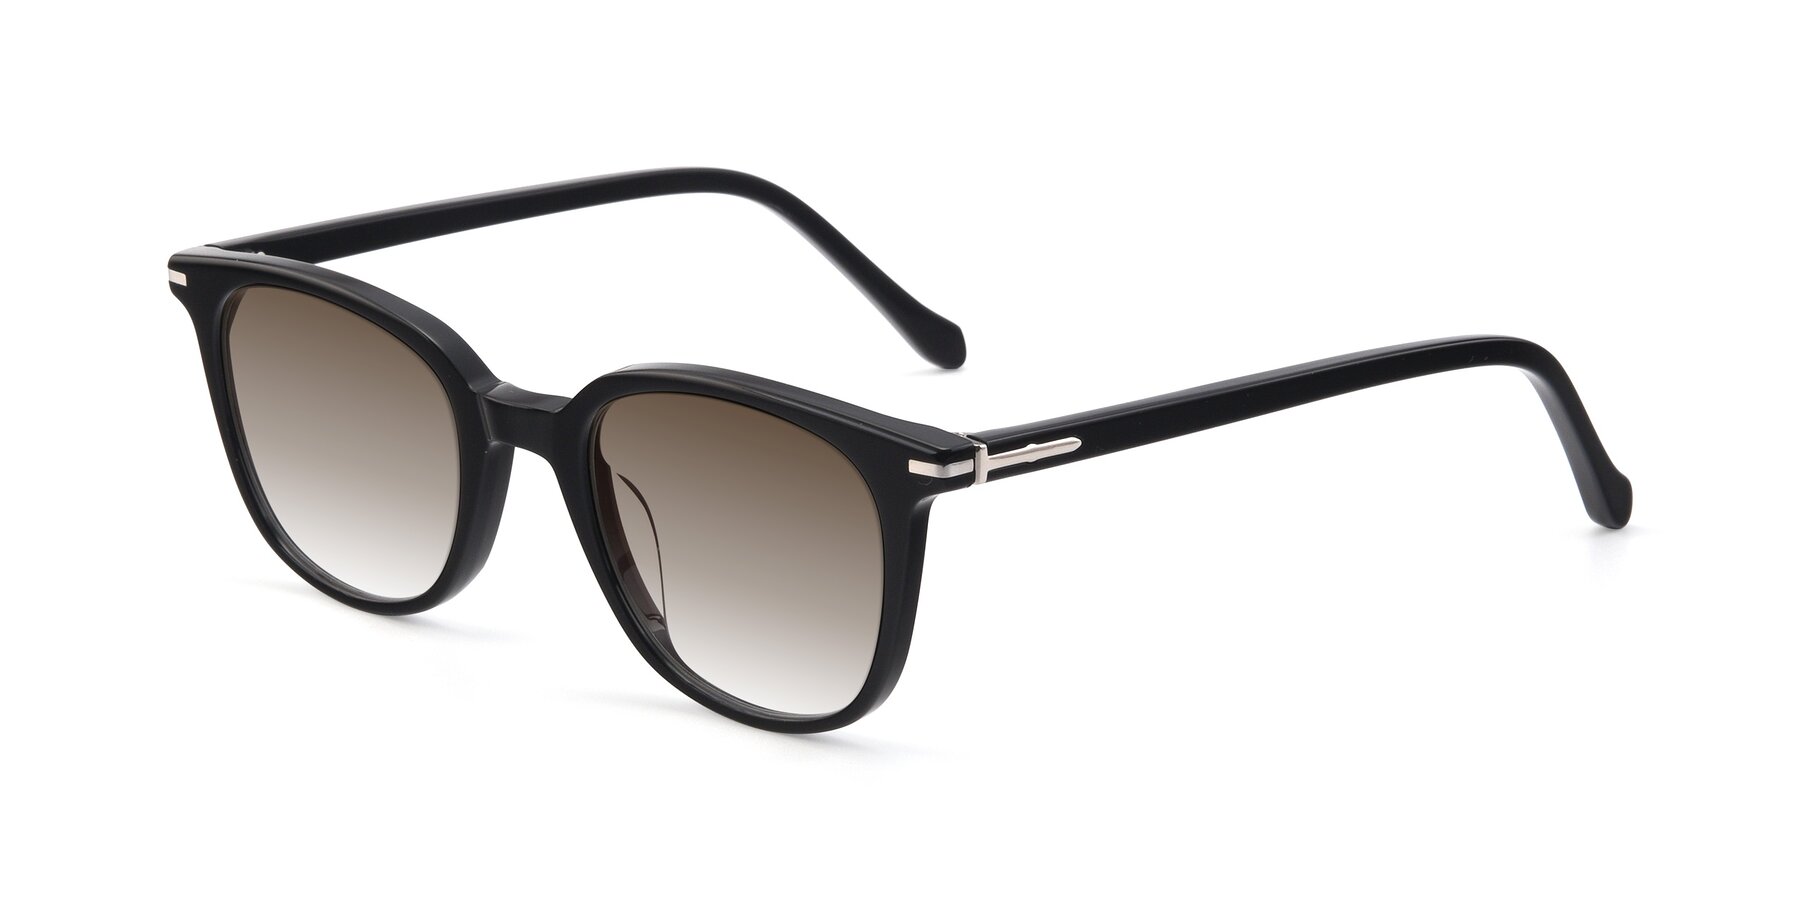 Angle of 17562 in Black with Brown Gradient Lenses